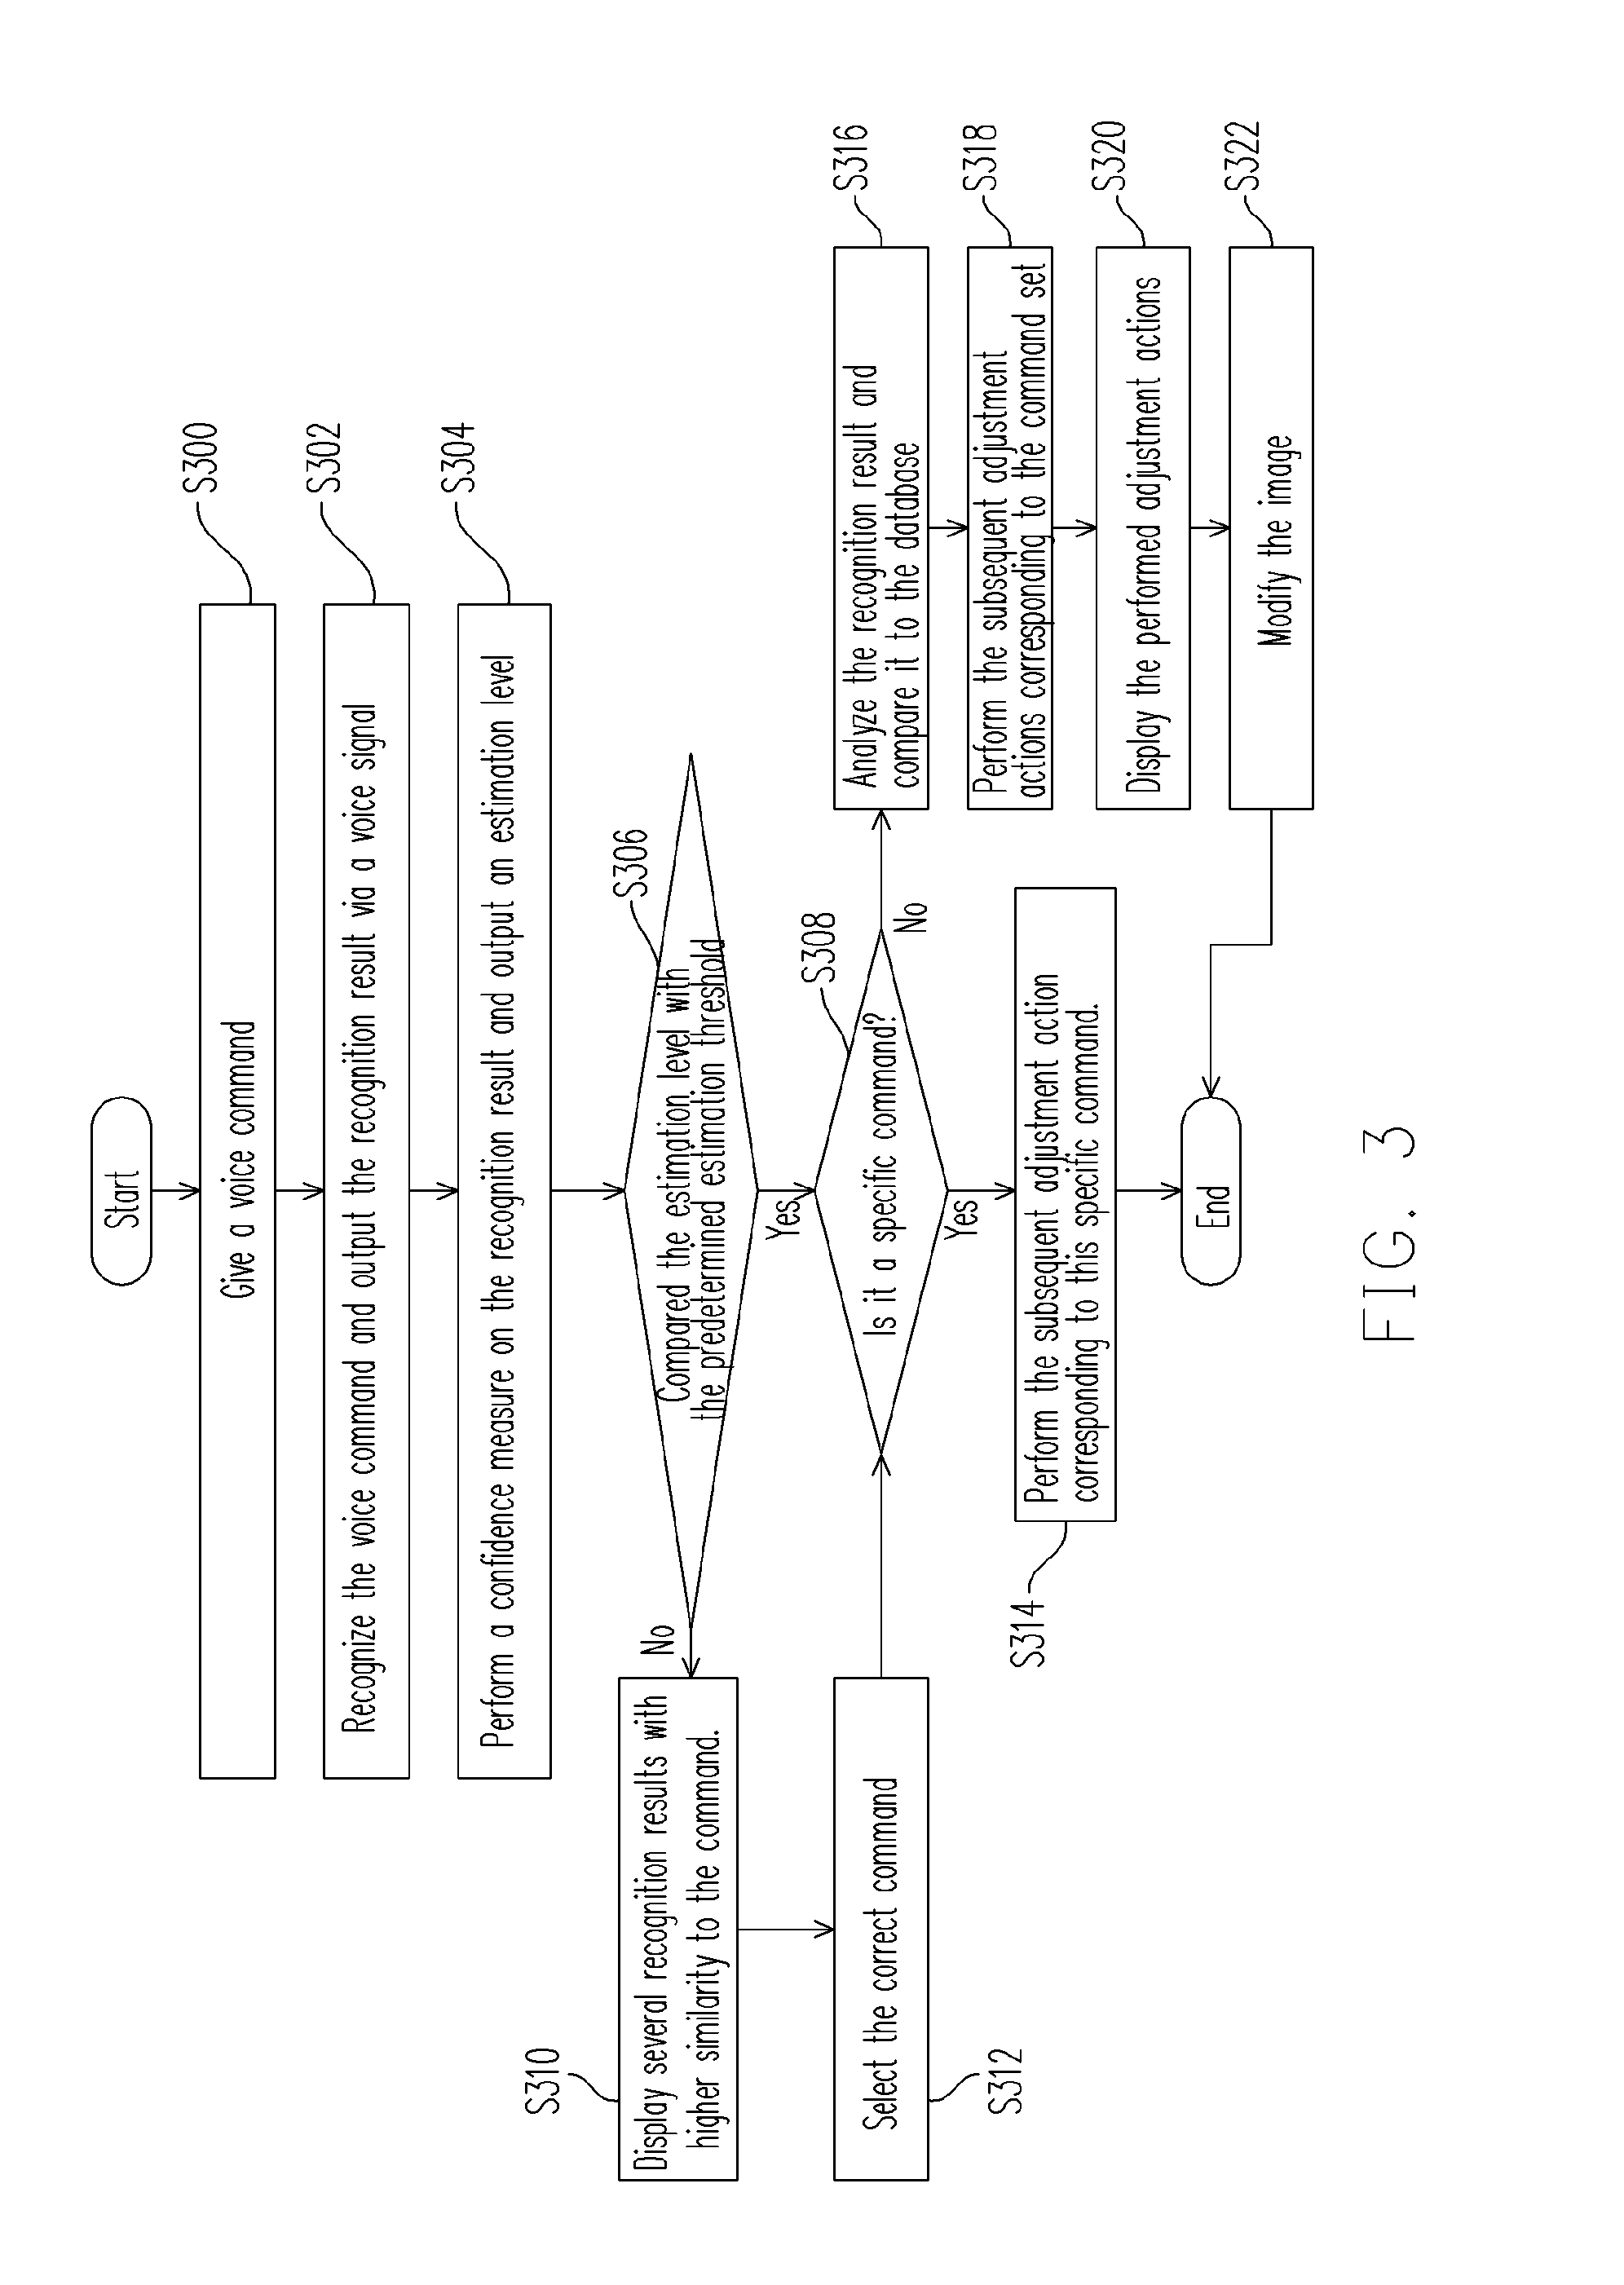 Video device with voice-assisted system